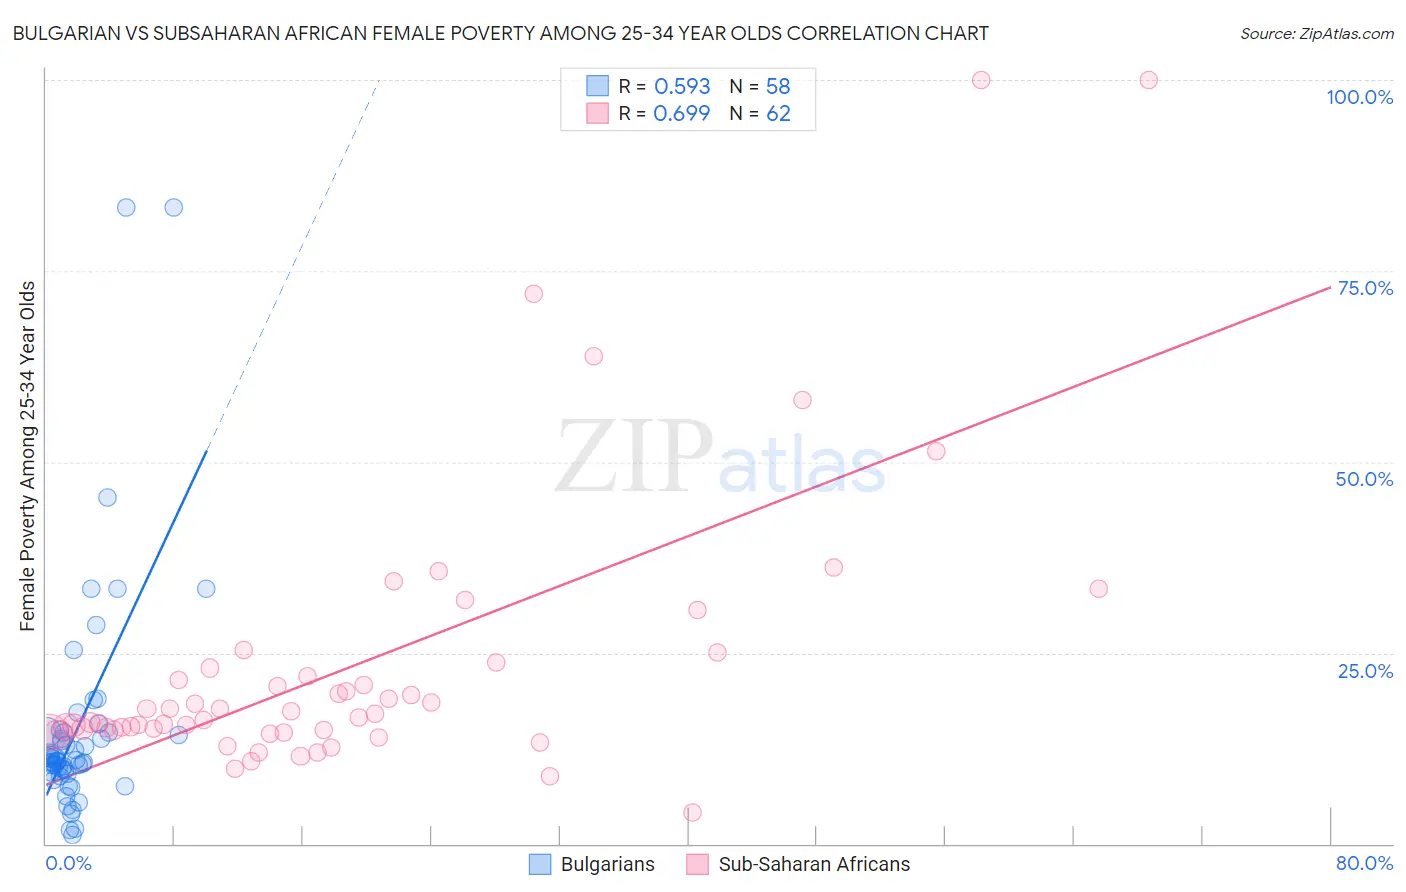 Bulgarian vs Subsaharan African Female Poverty Among 25-34 Year Olds